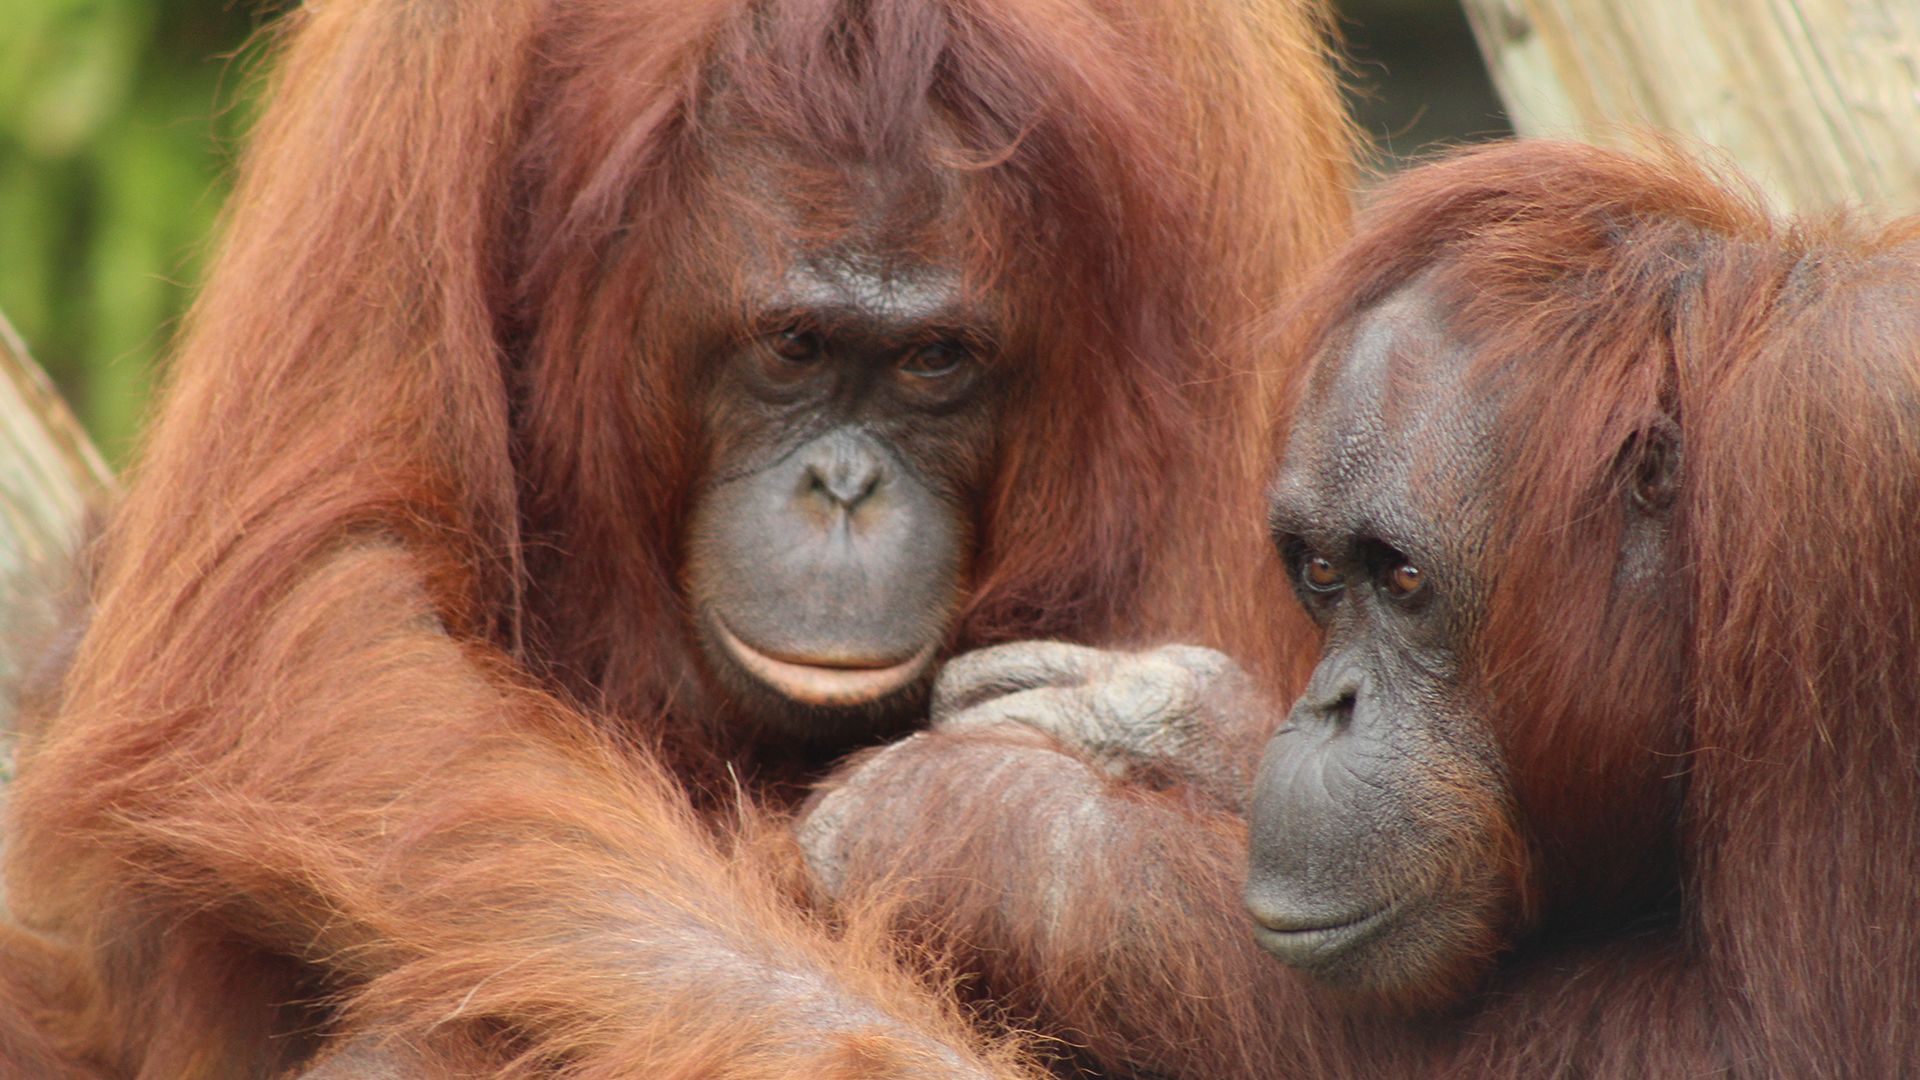 Though orangutans are typically solitary in the wild, at ZooTampa, the Bornean orangutan group... [Photo of the day - March 2022]